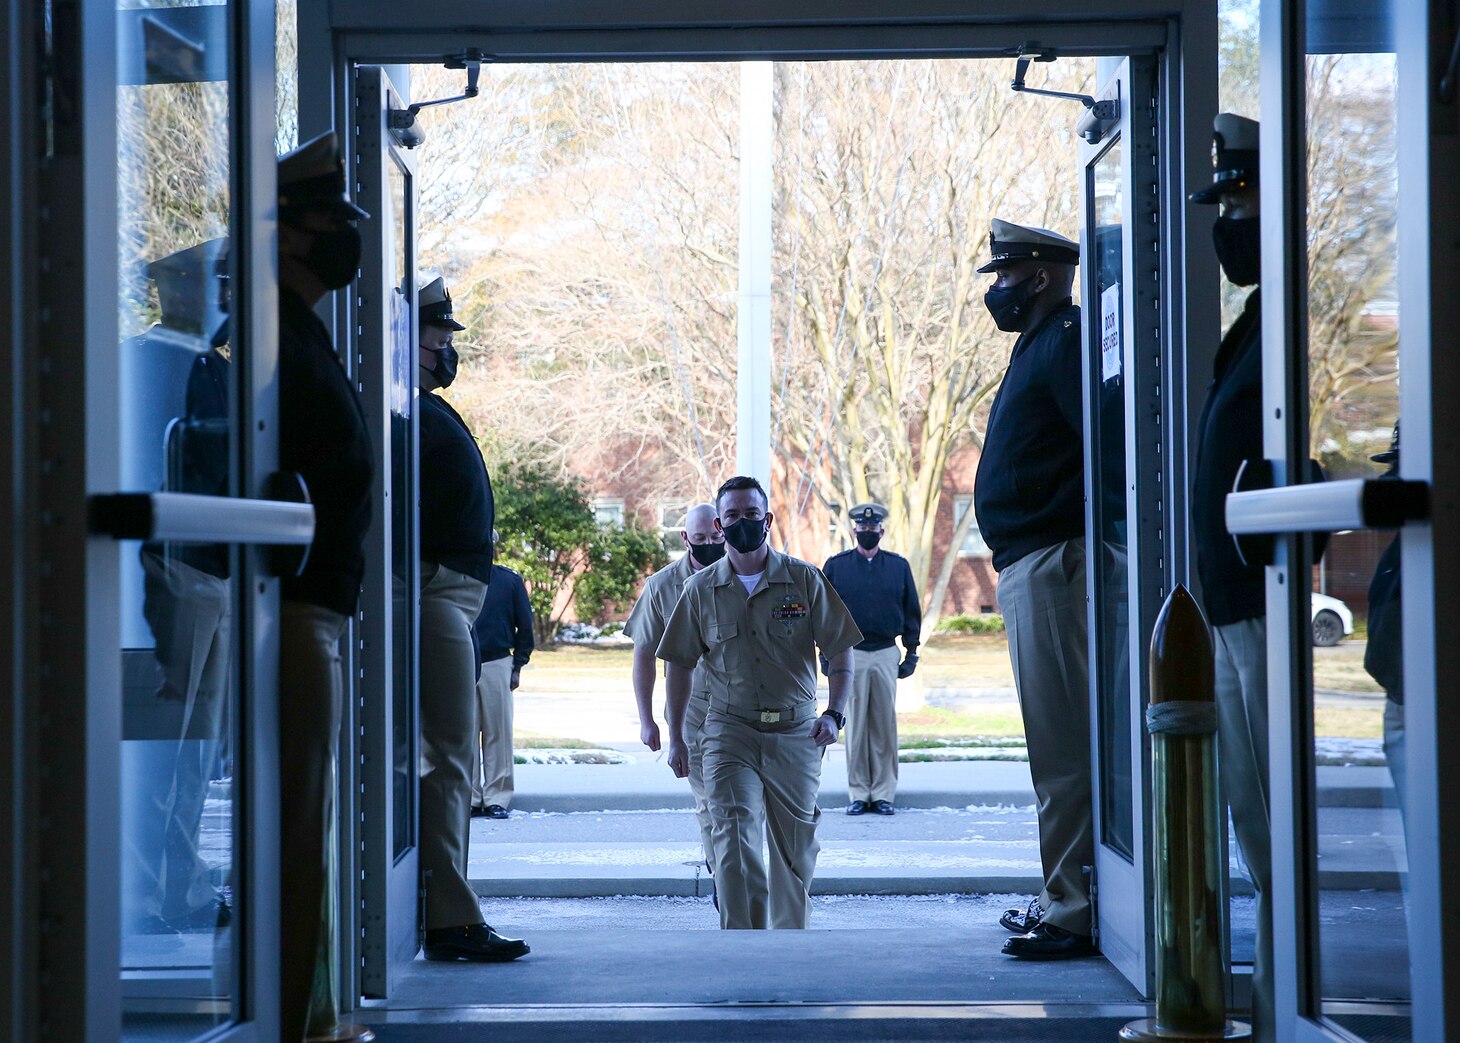 Chief Aviation Aerographer’s Mate Travis Strait, front, and Chief Intelligence Specialist Joshua Waldrop, rear, assigned to U.S. Fleet Forces Command (USFFC), enter the USFFC headquarters in Norfolk, Virginia, in preparation for their advancement during a chief petty officer (CPO) pinning ceremony.